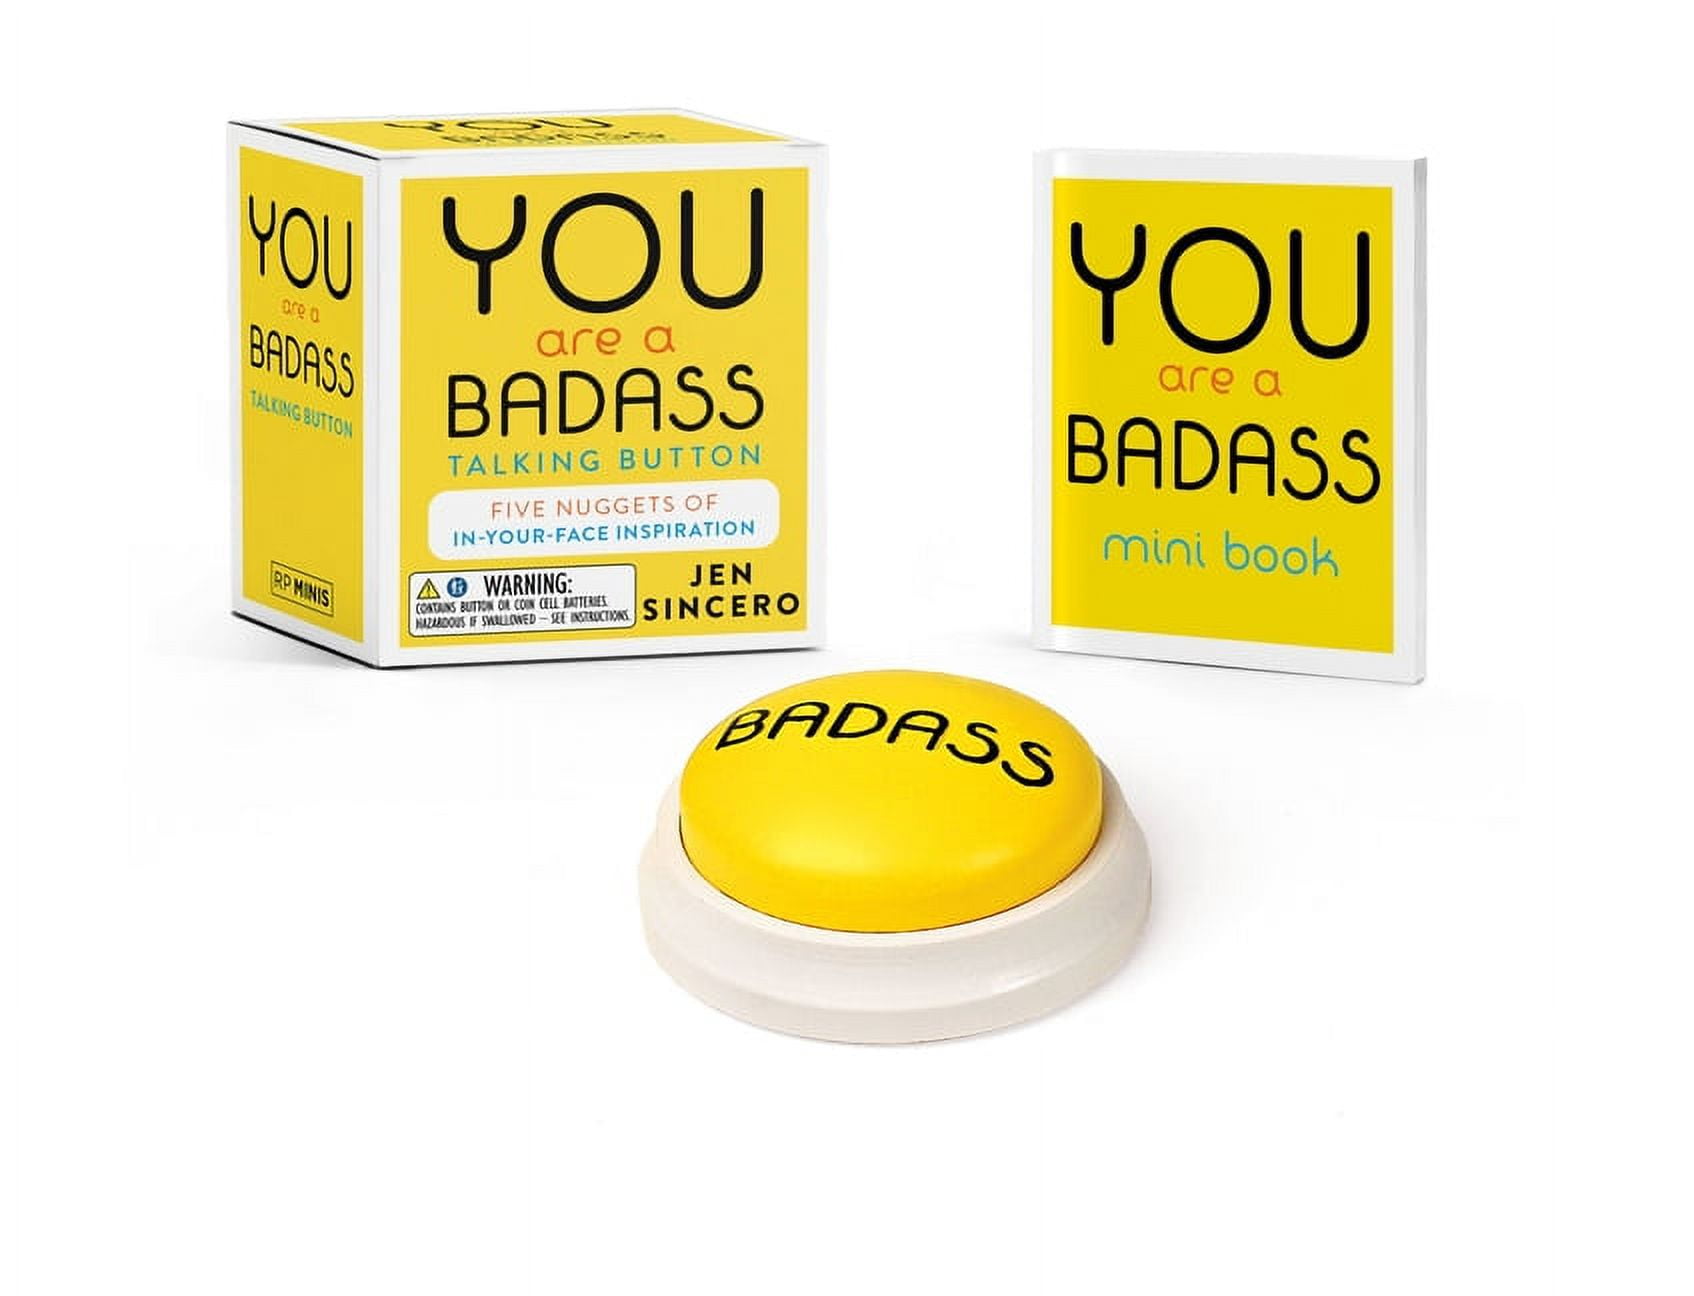 You Are a Badass® Talking Button: Five Nuggets of In-Your-Face